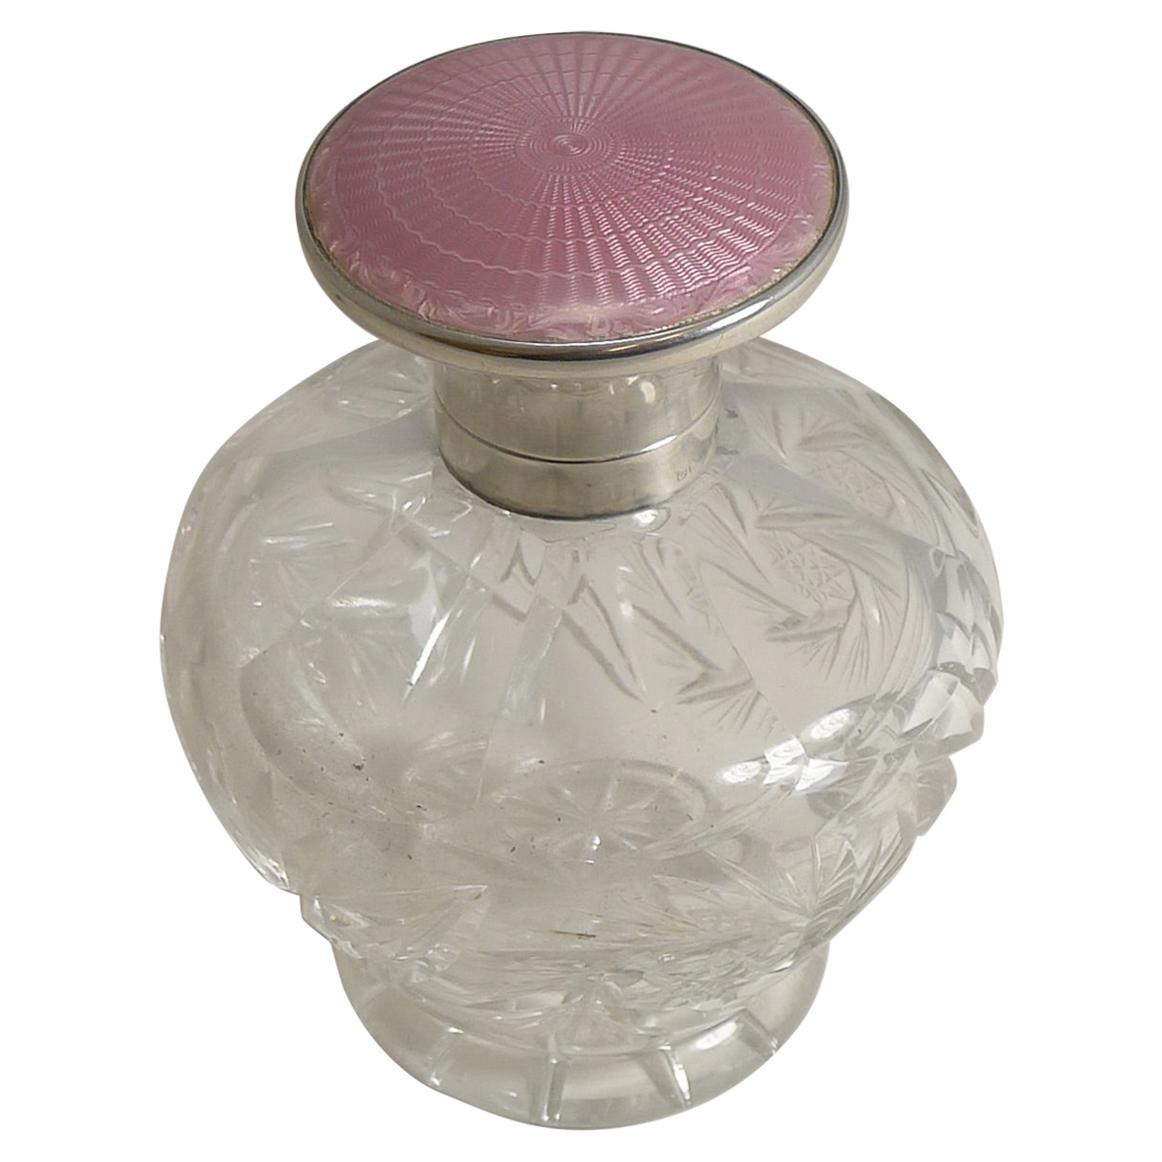 Cut Crystal Perfume Bottle, English Sterling Silver and Pink Guilloche Enamel